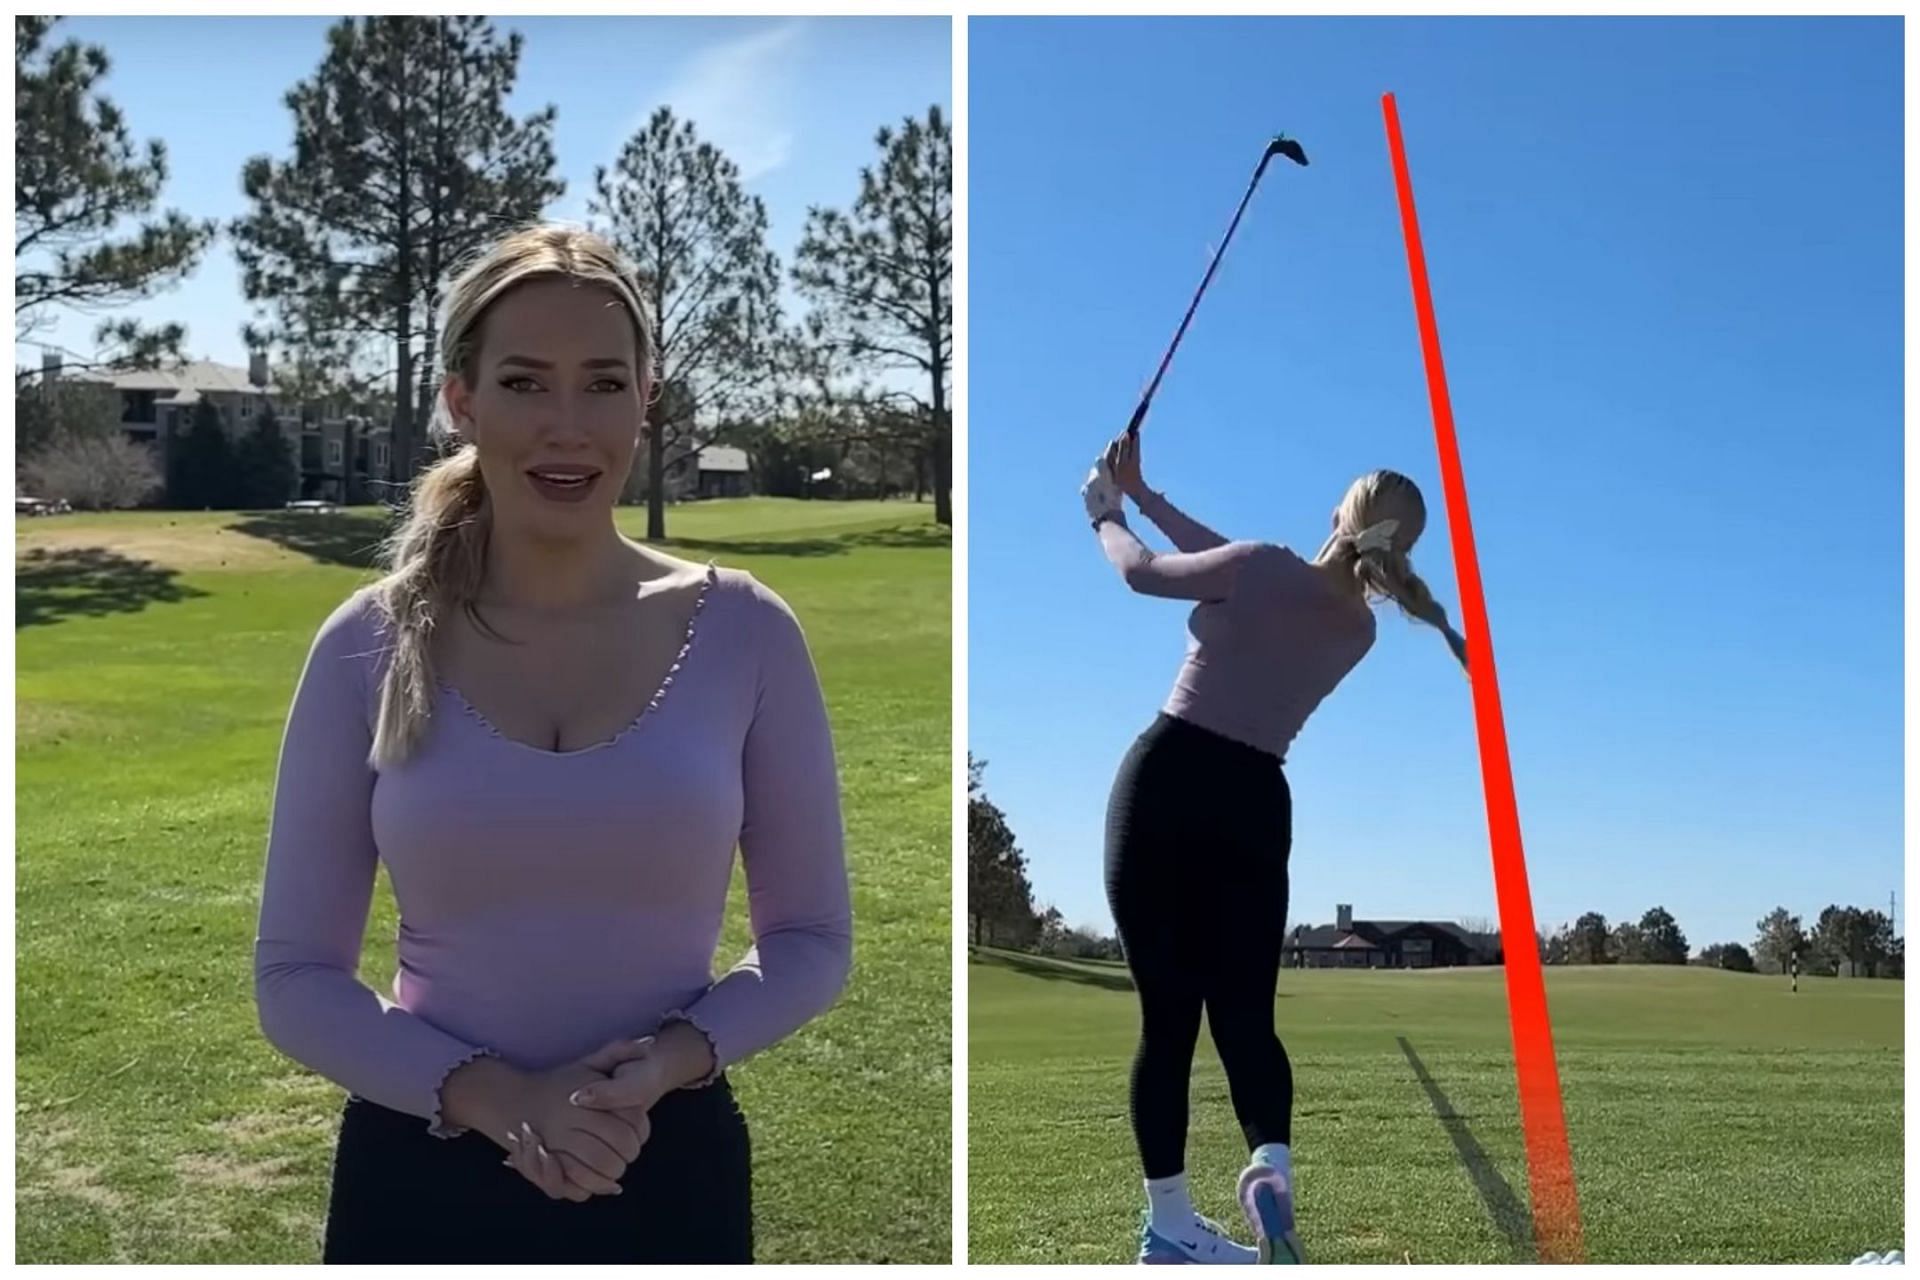 Paige Spiranac updated her driving distance in her latest youtube vide (Image via Youtube.com/Paige Spiranac)